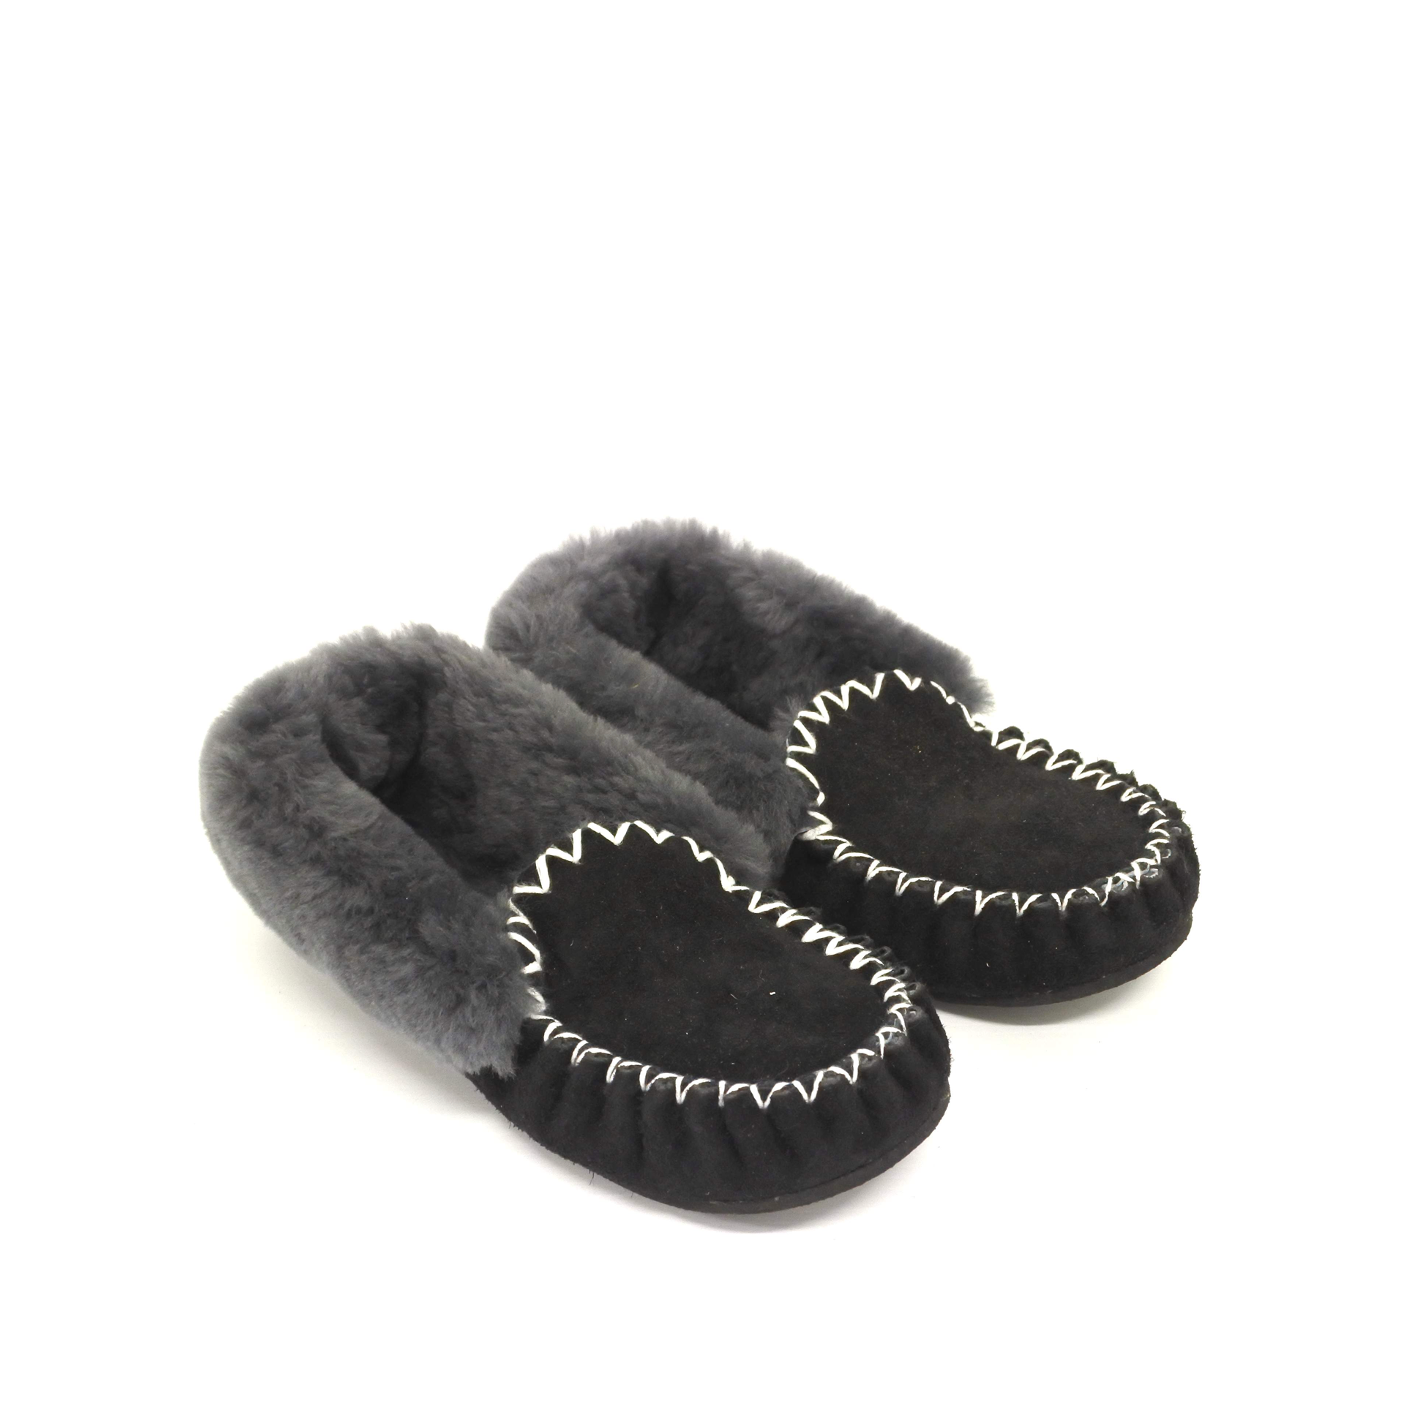 WOMEN'S TRADITIONAL MOCCASINS